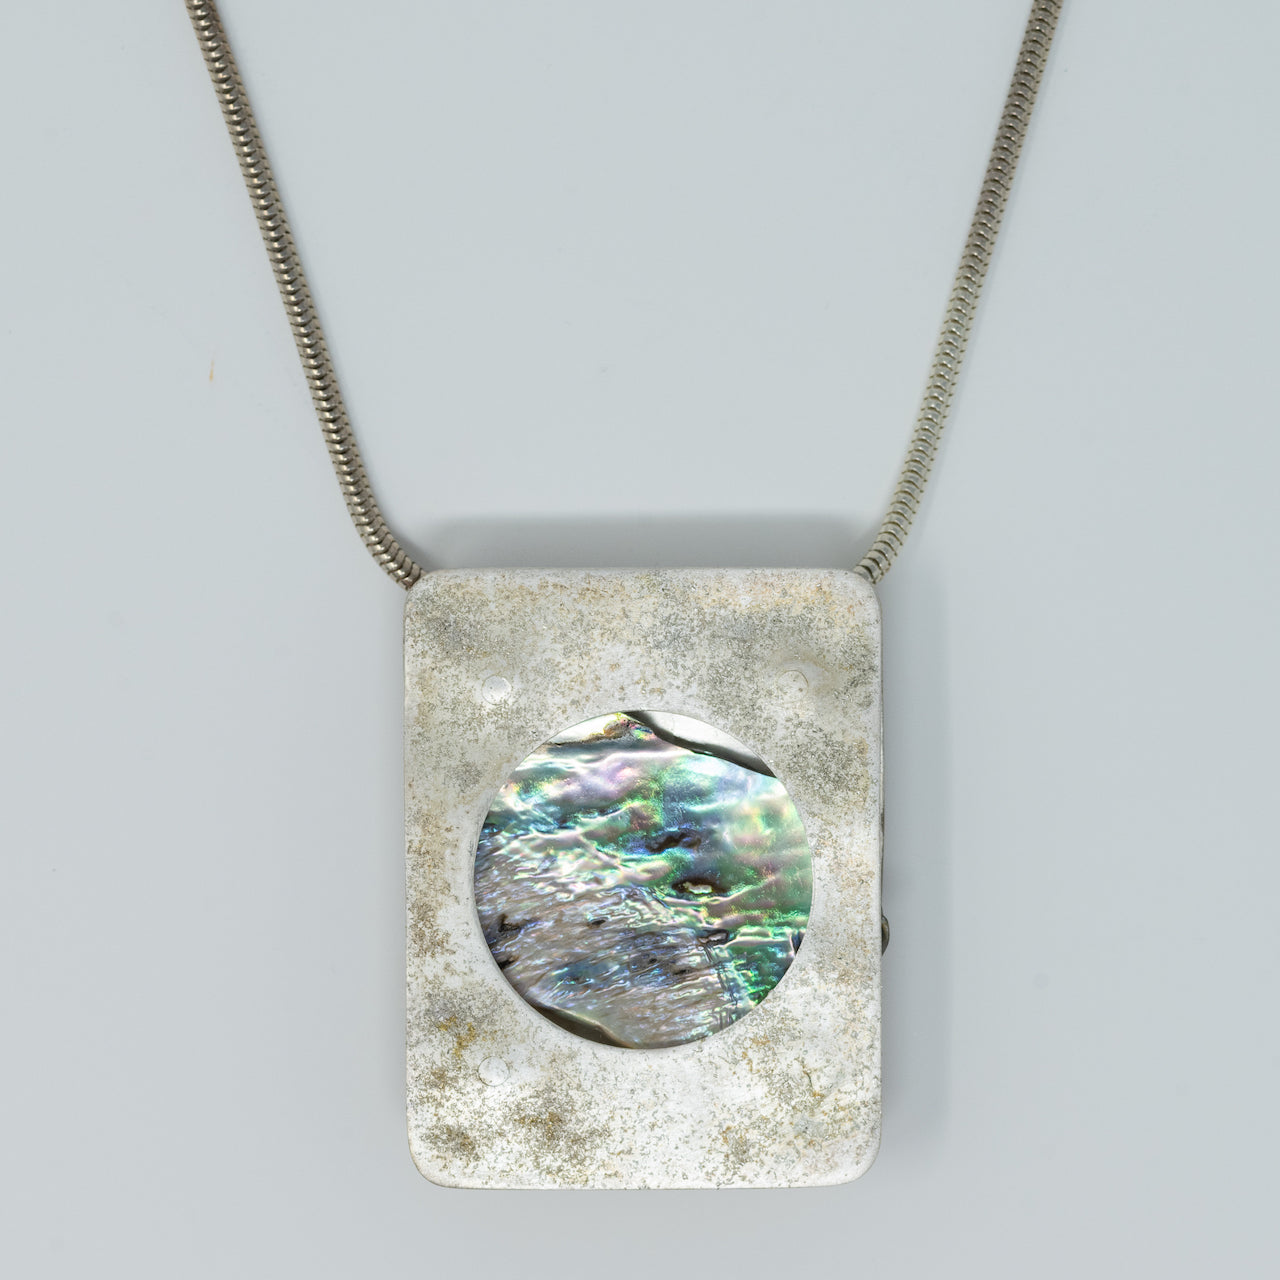 Necklace – The Hub on Canal